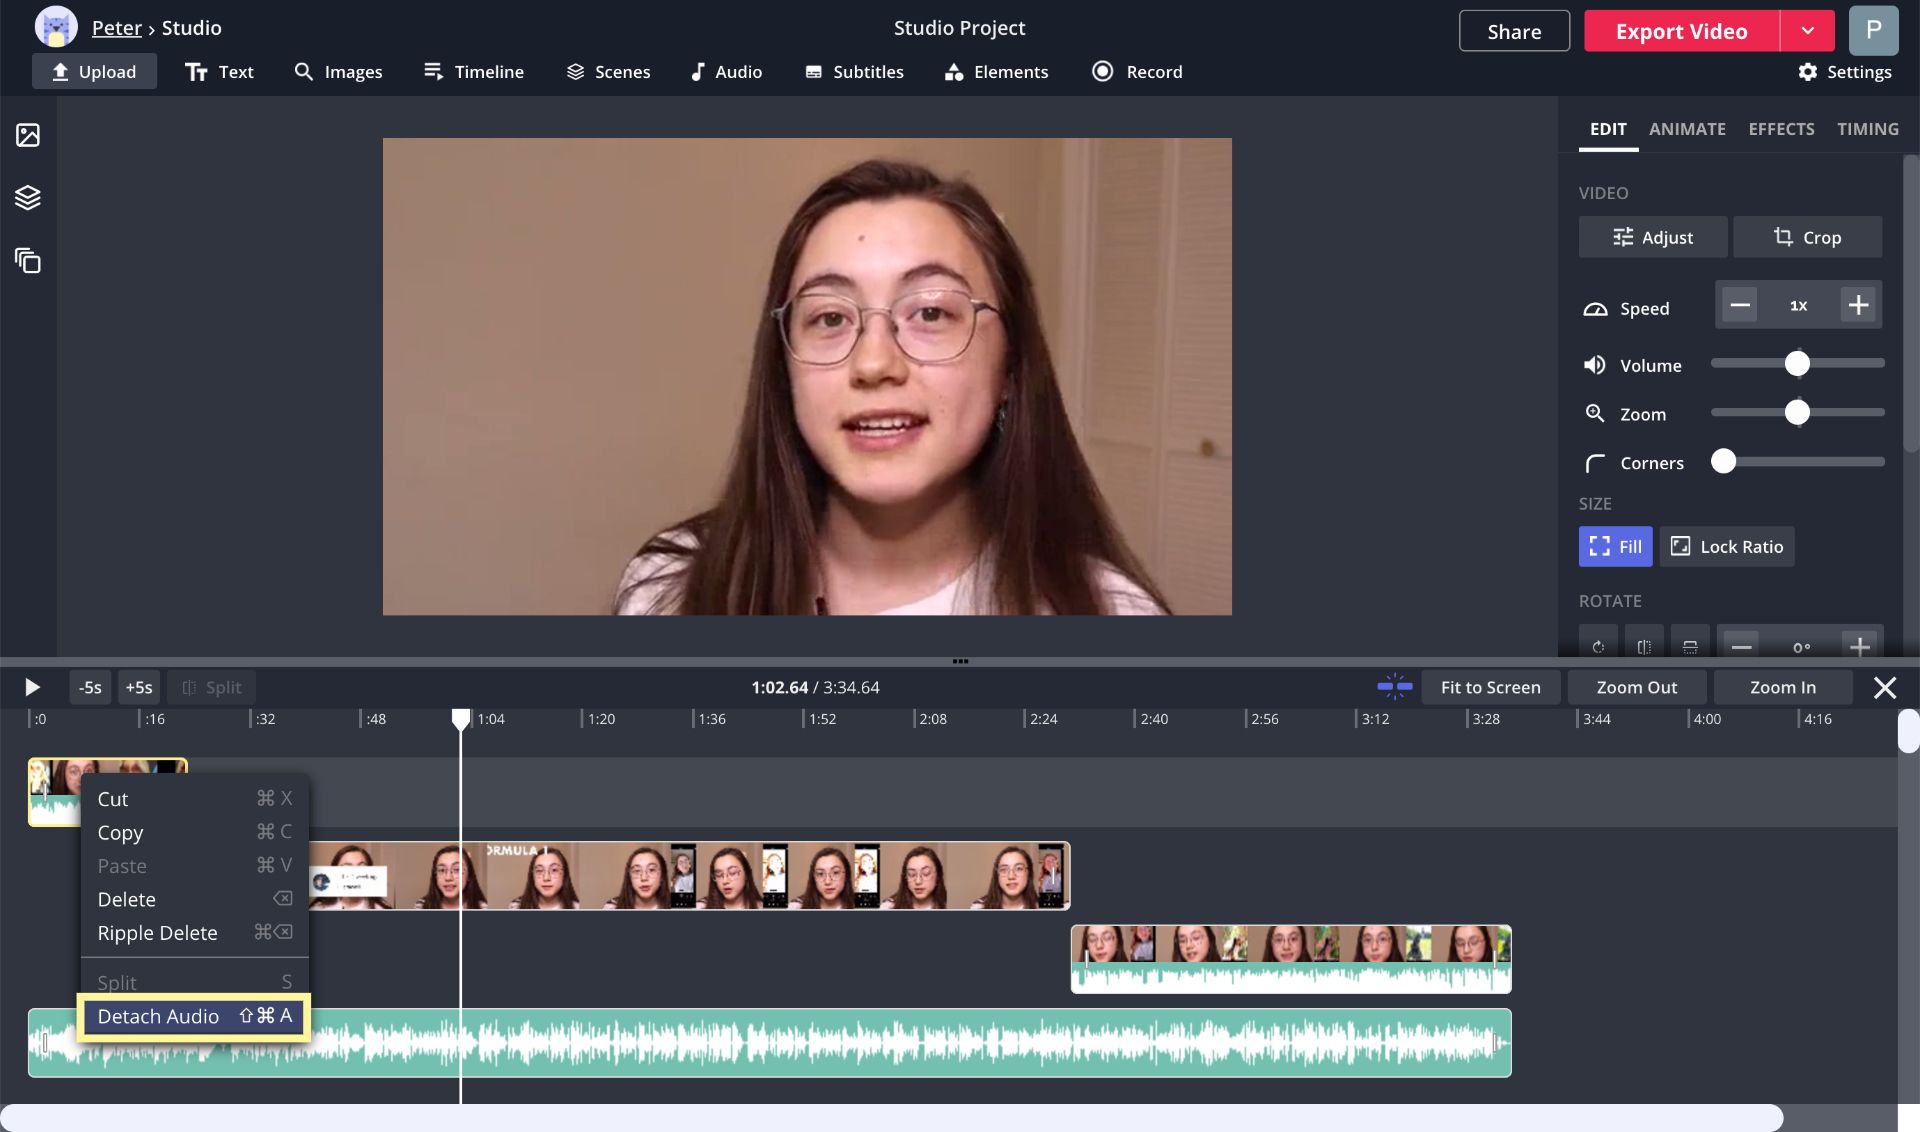 A screenshot showing how to combine multiple video and audio files in the Kapwing Timeline.